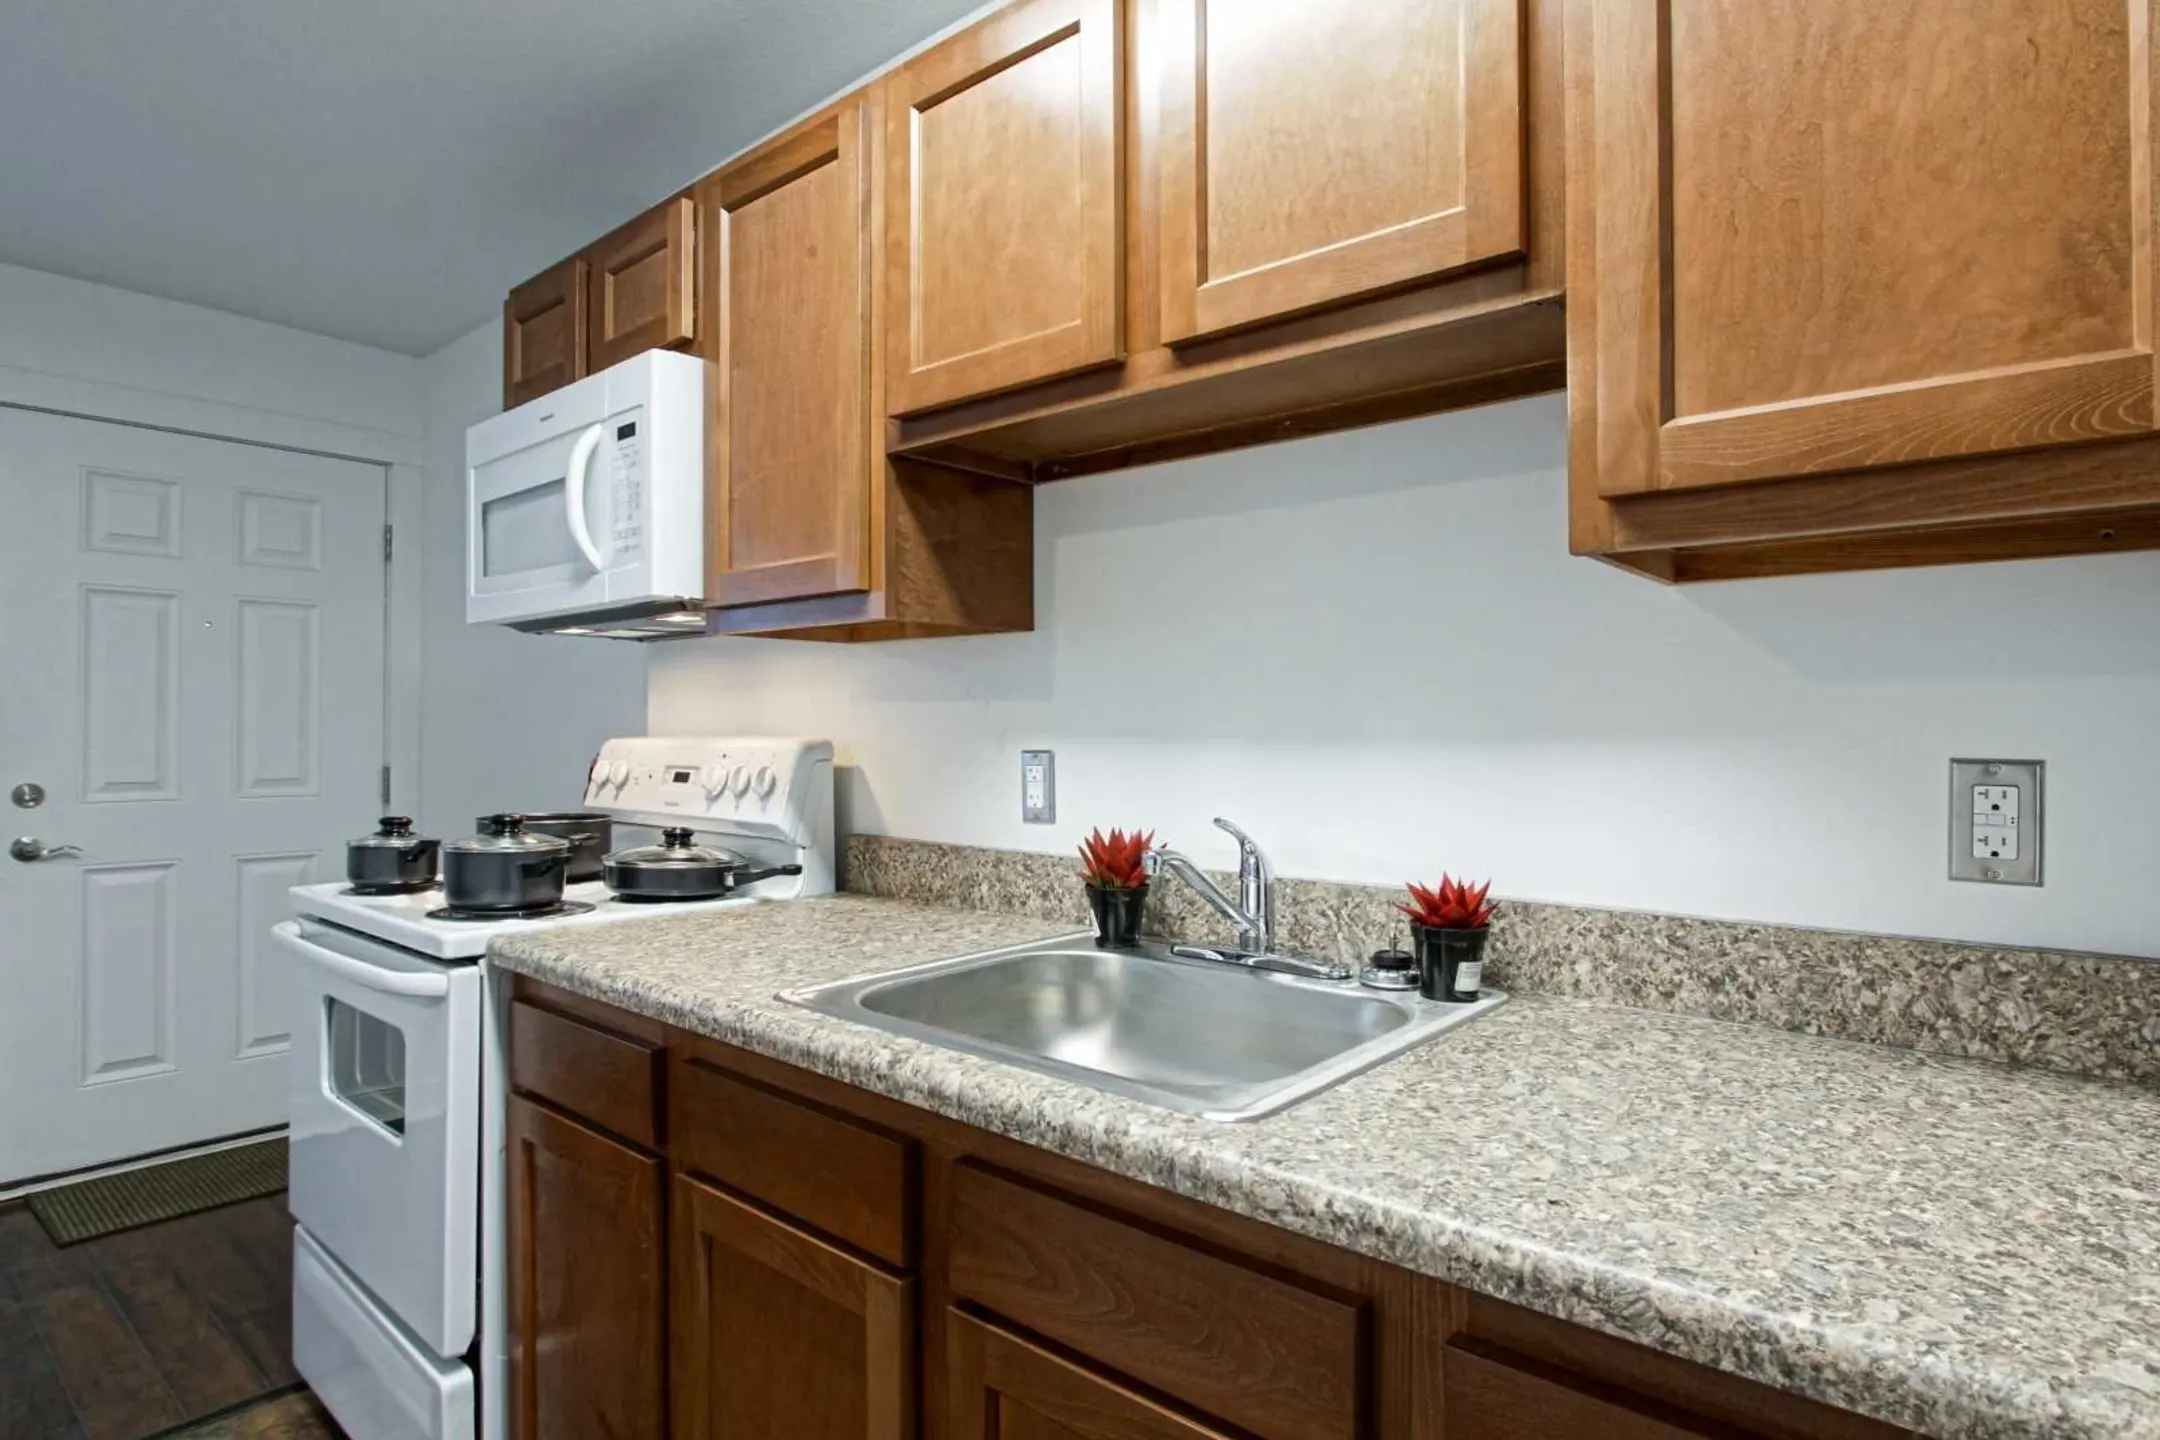 Kitchen - Woodworth Park Apartments - North Lima, OH